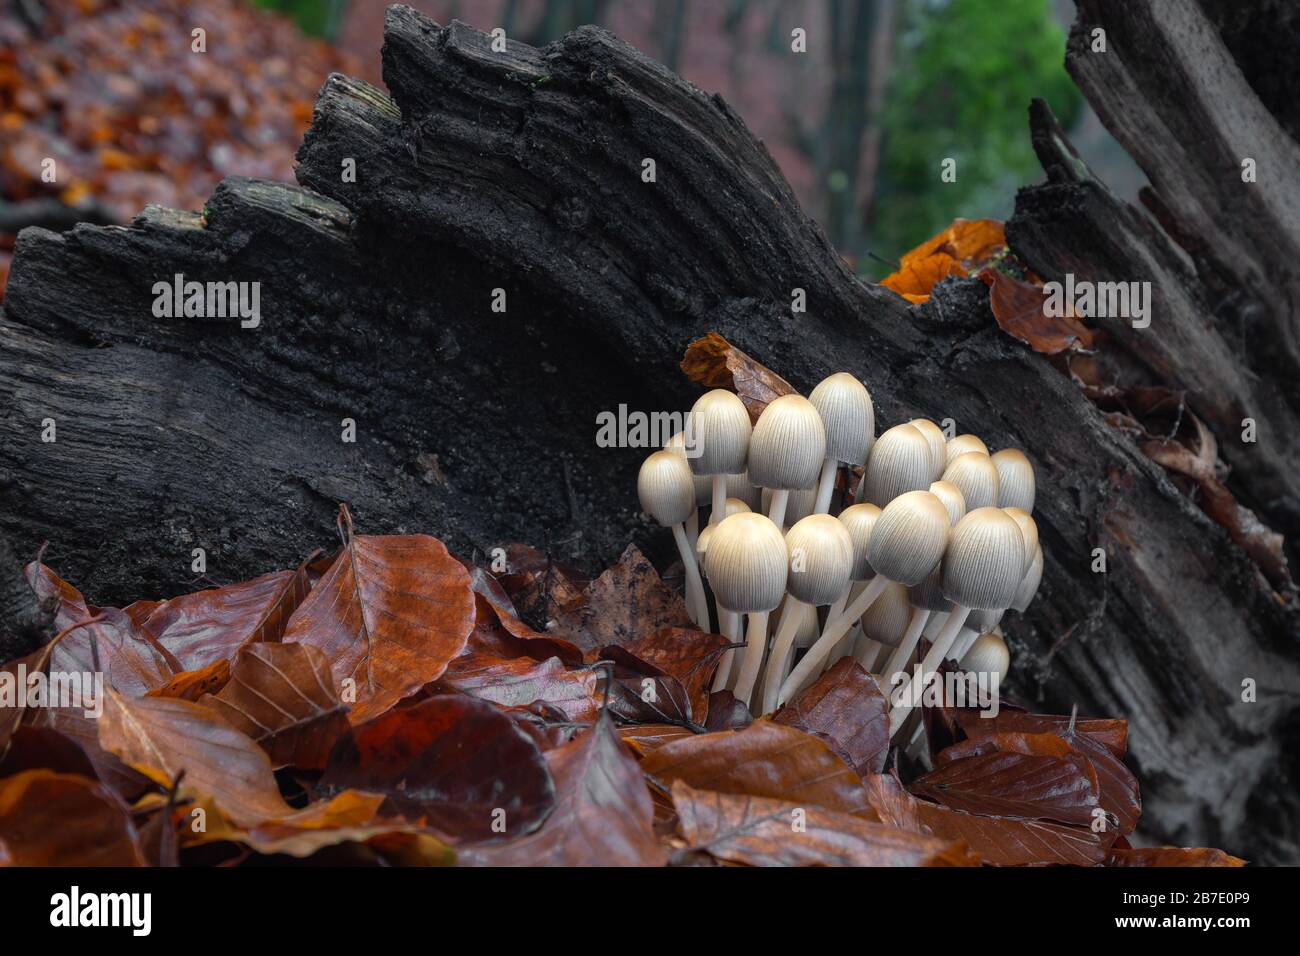 Fall scene with a group of mushrooms from central Europe, Slovakia. Stock Photo